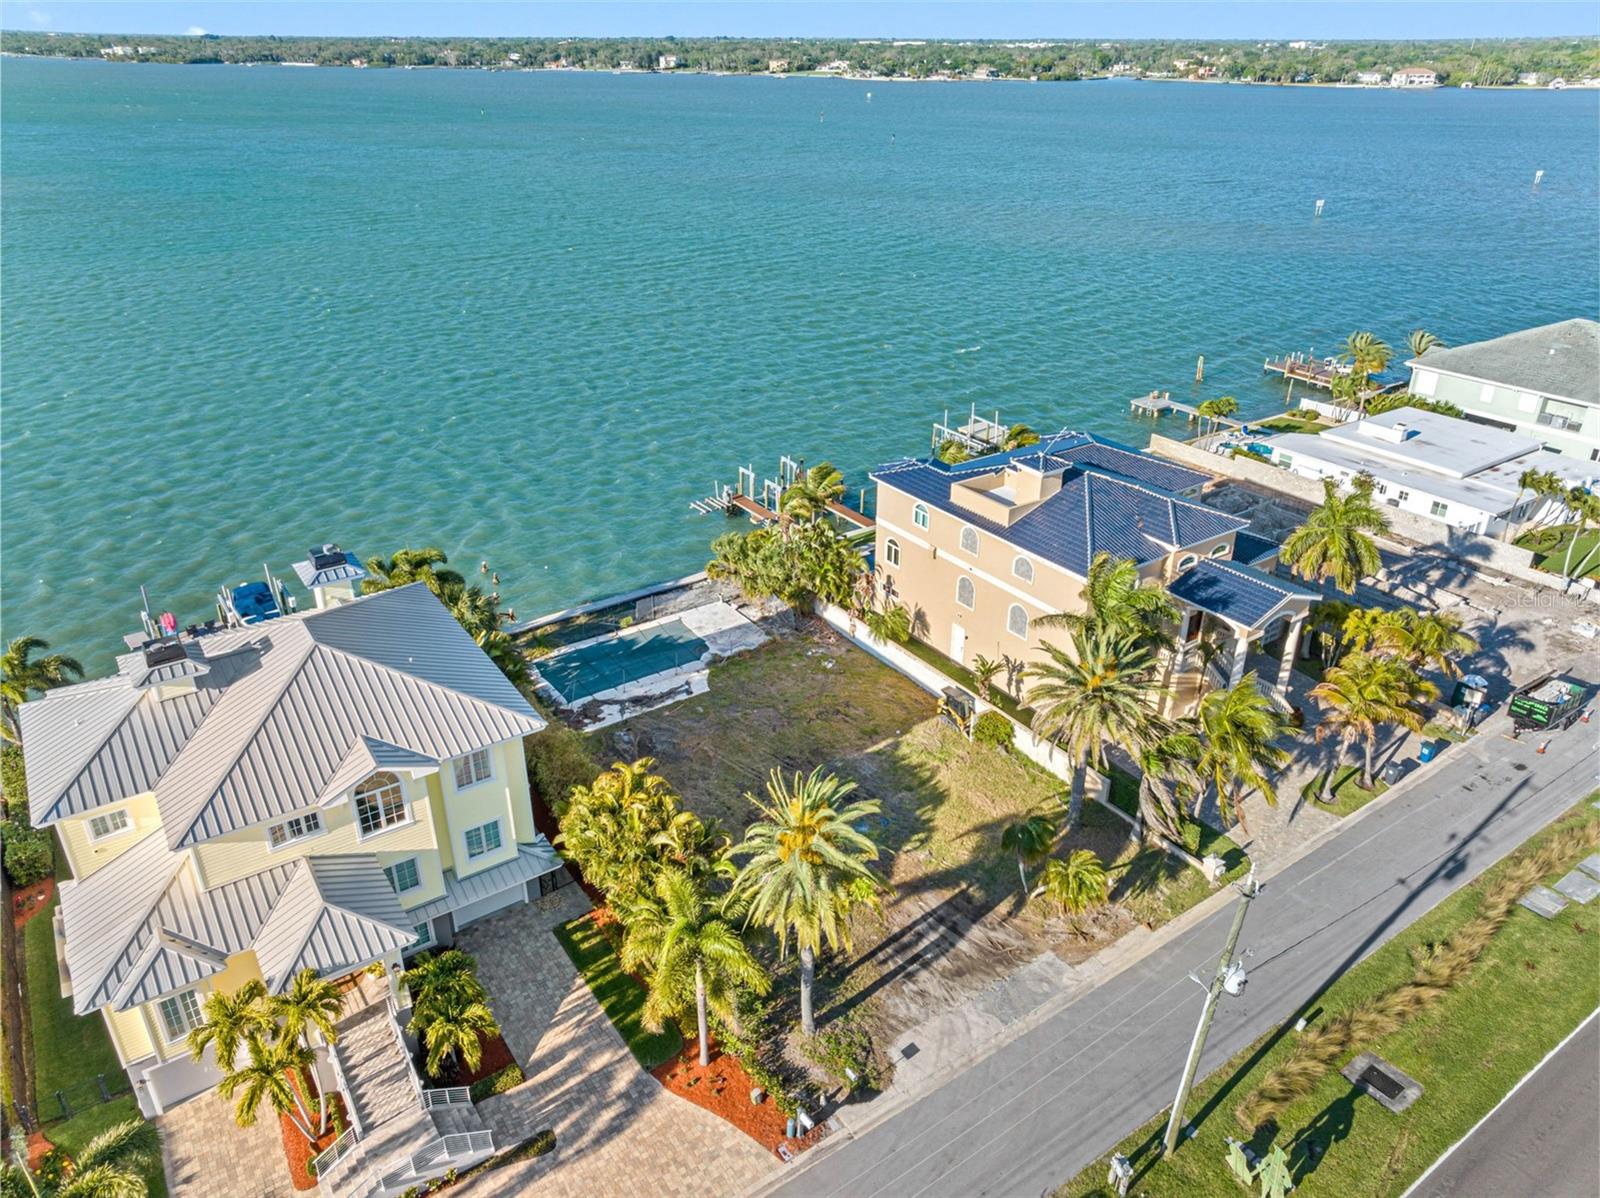 Situated on the main channel of Boca Ciega Bay